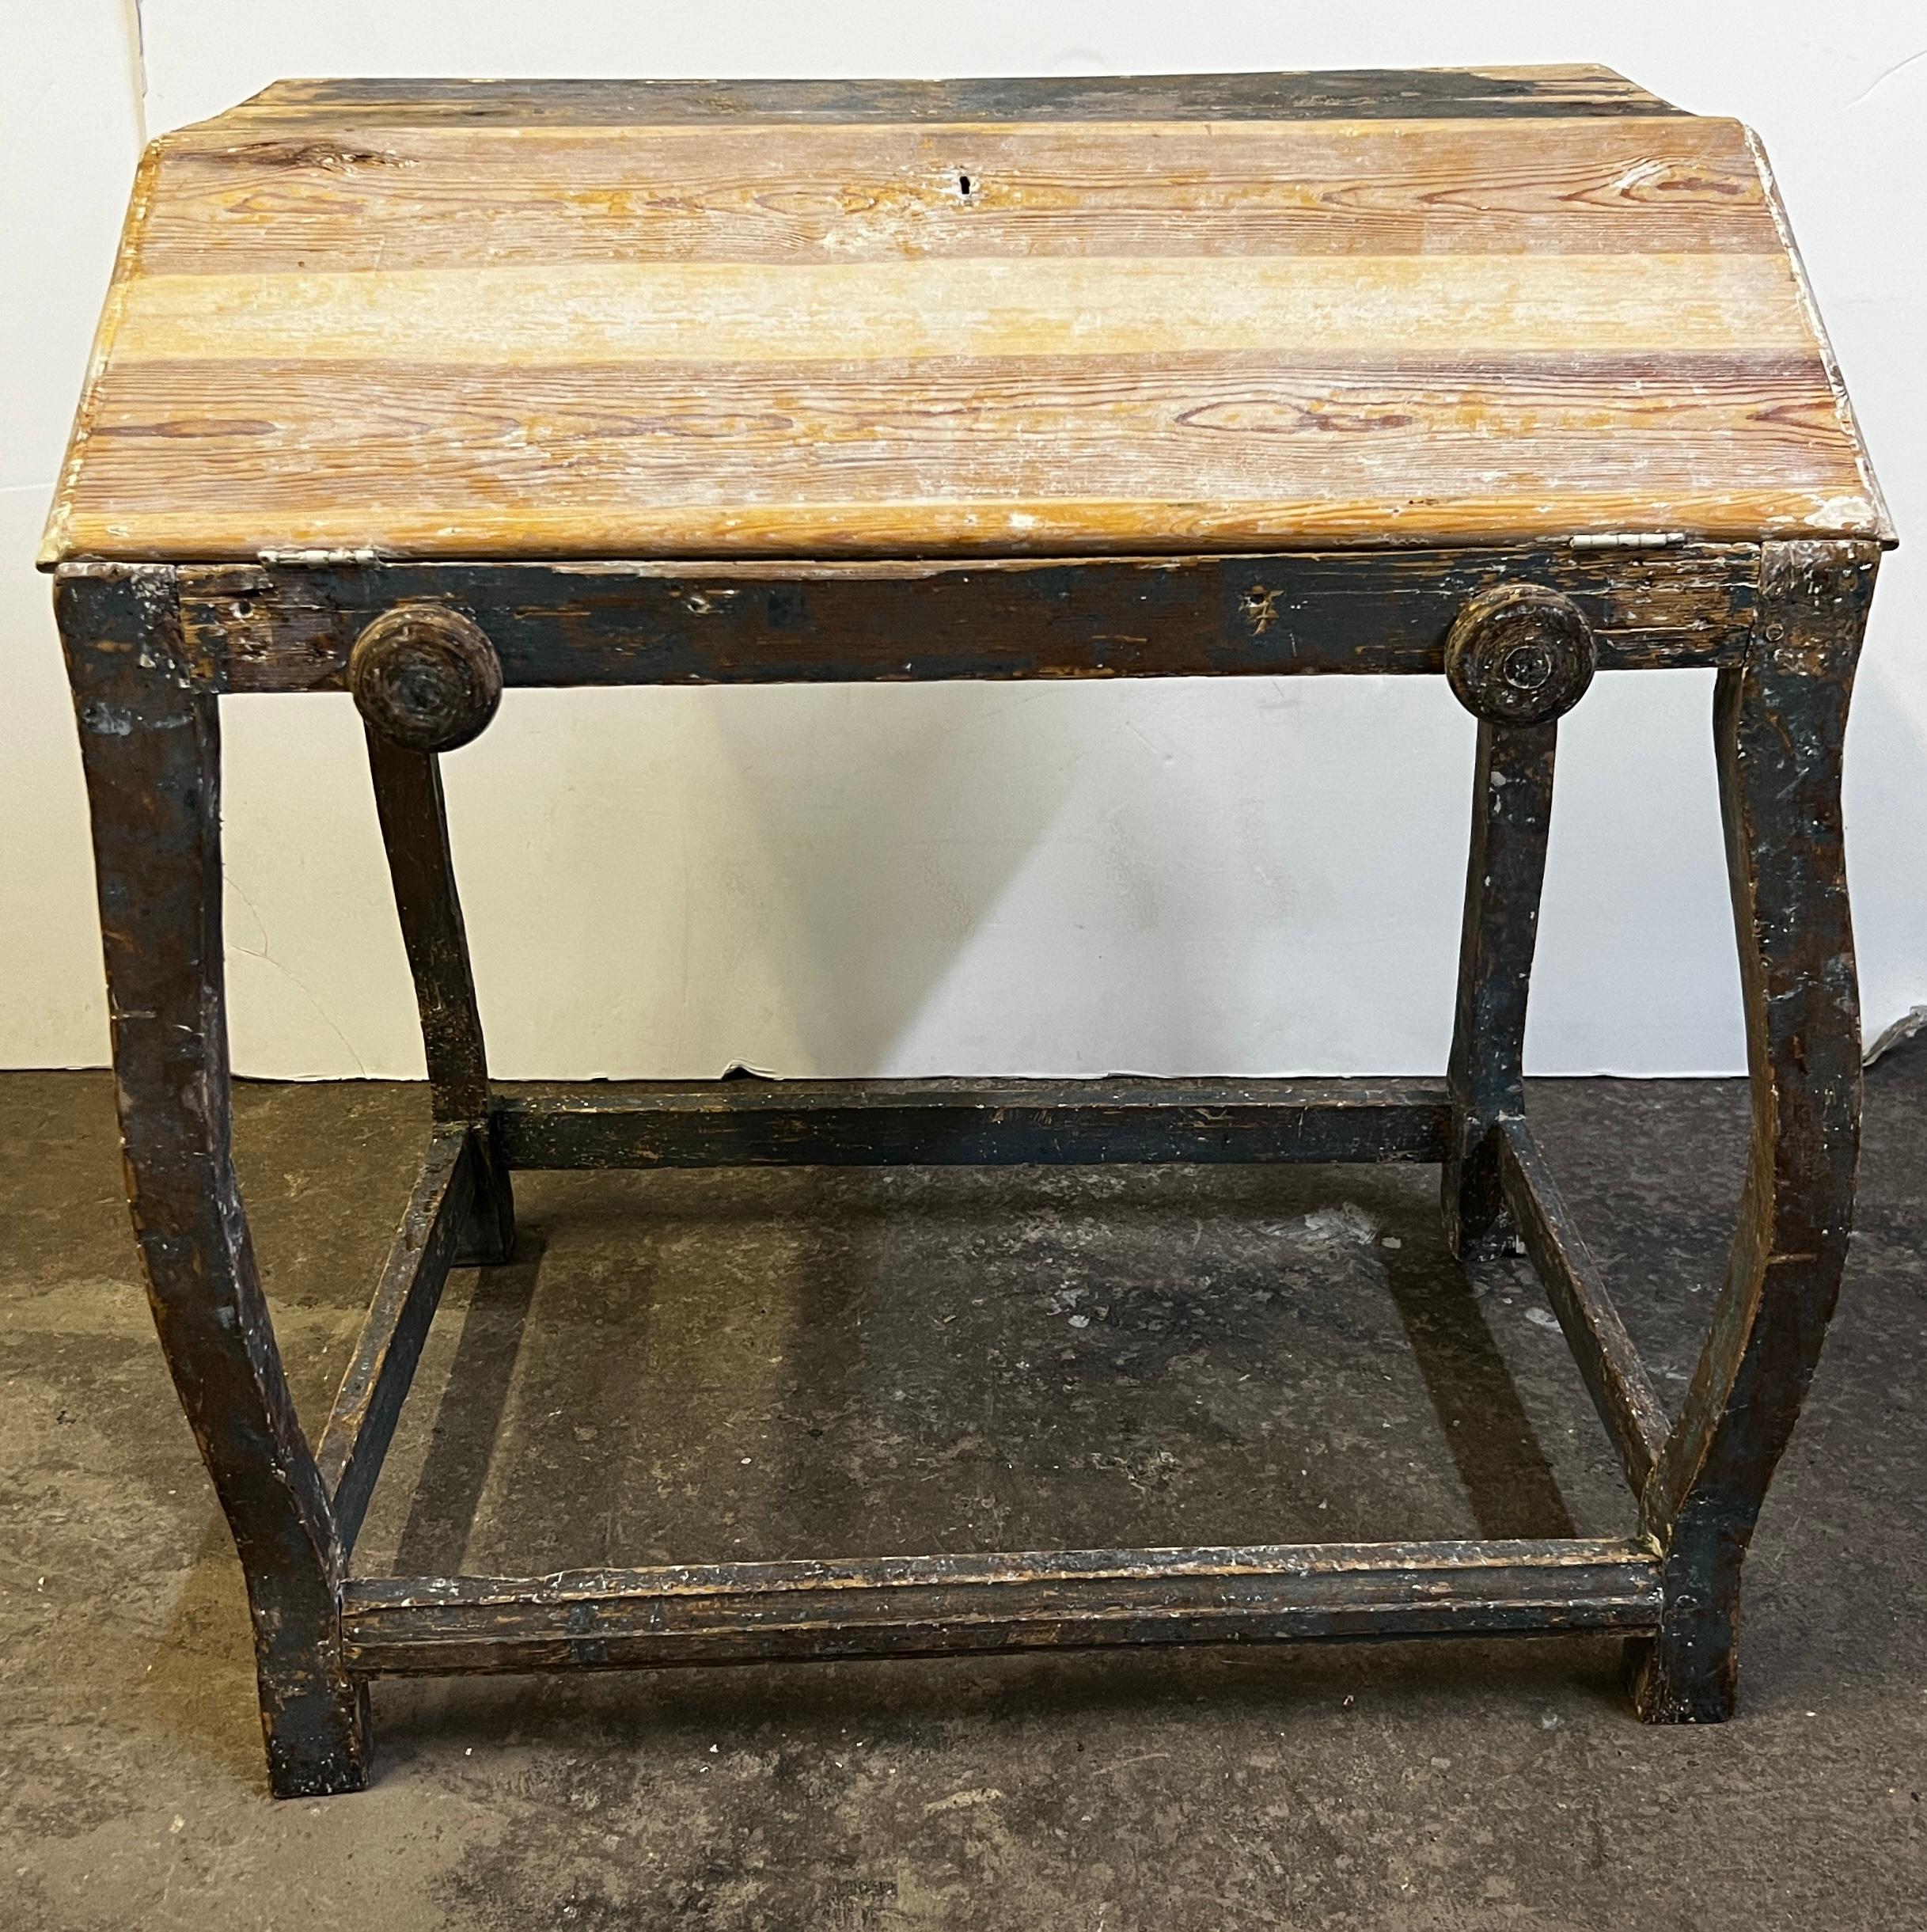 This beautiful and unique 19th century Swedish Gustavian writing desk is perfect for any room or hallway. The colors are amazing with the distress and dry scrapping for a perfect look for a wabi sabi, traditional, minimalist or maximalist room. The